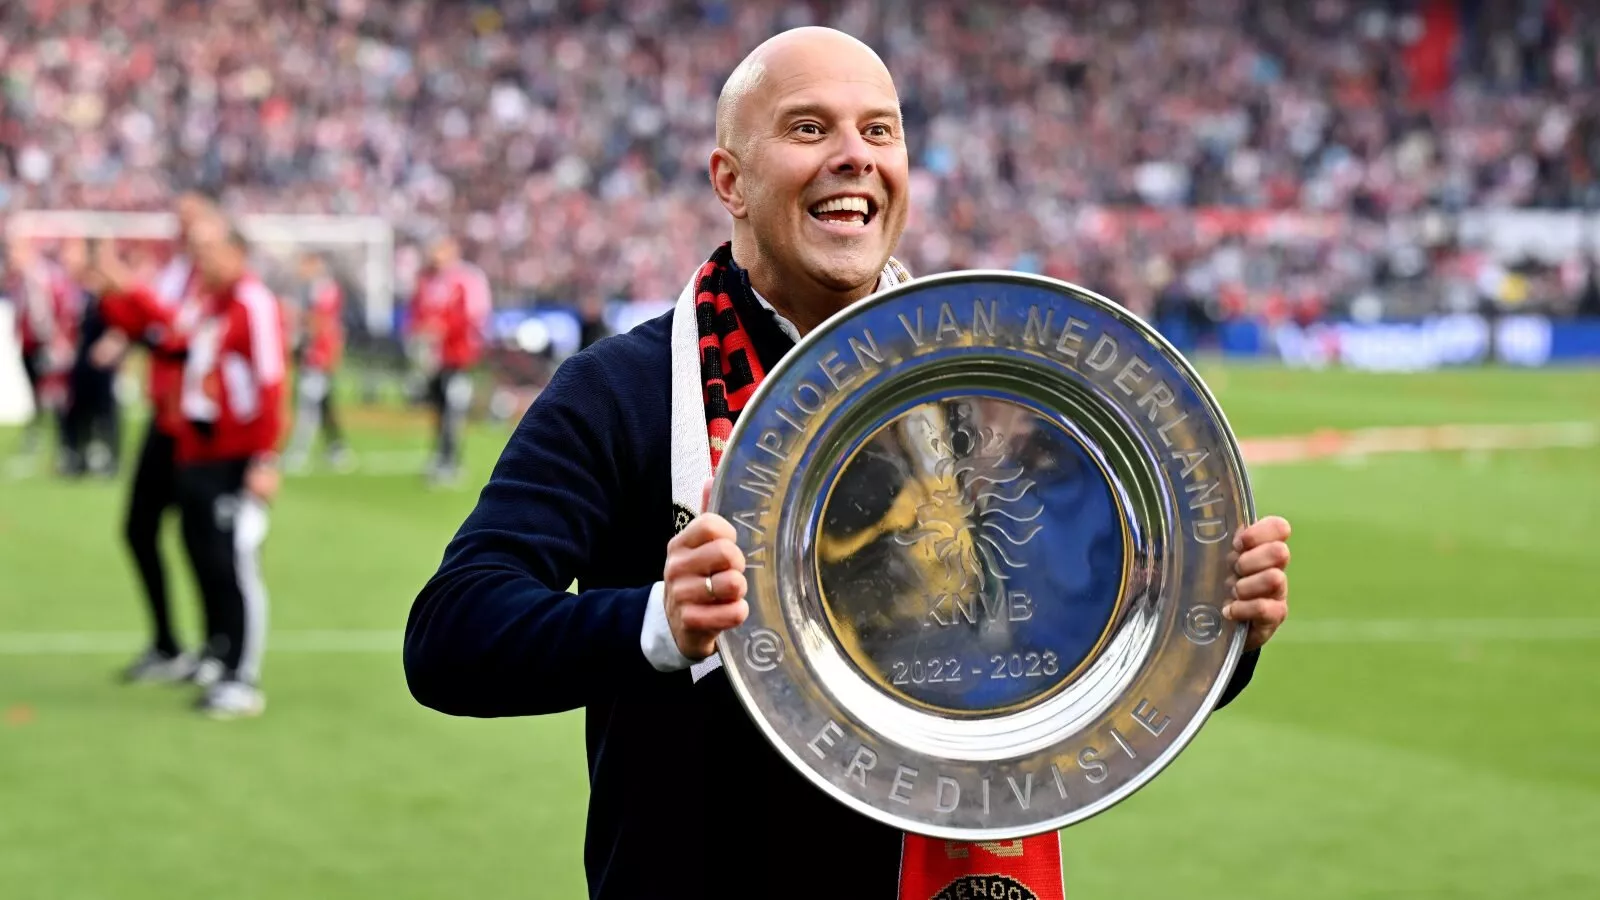  A photo of Dutch football manager Arne Slot, who is the current manager of Feyenoord Rotterdam, celebrating winning the 2022–23 KNVB Cup with his players in the background.